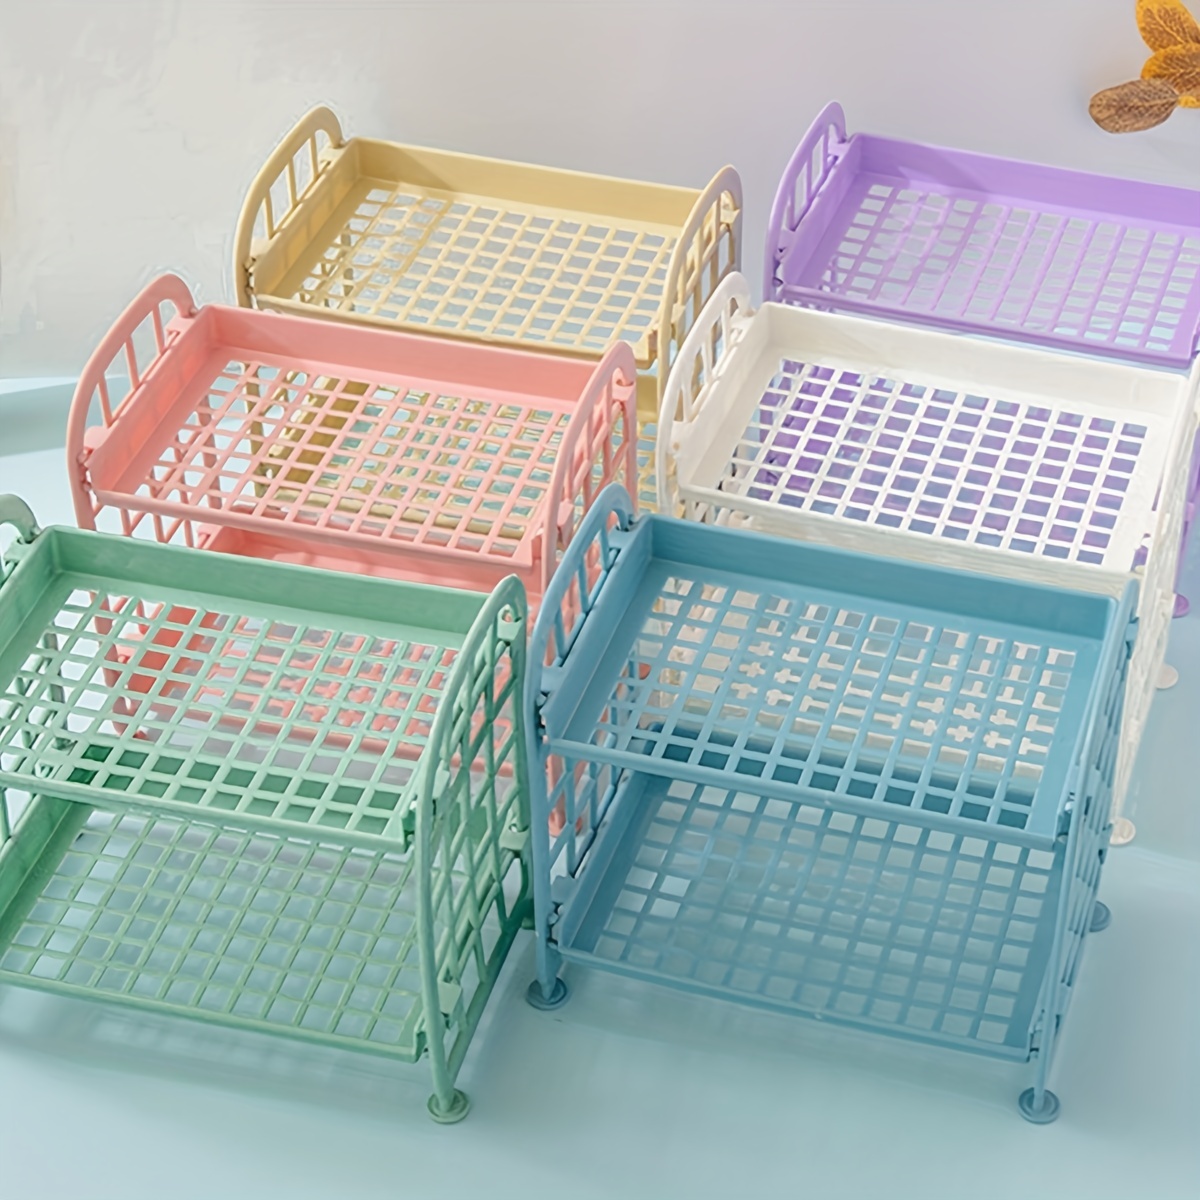 1pc [size 29cm*21cm*5.5cm] Ins Style Transparent Acrylic Storage Rack,  Desktop Organizer For Dormitory, Cosmetic And Kitchen Heightening Shelf